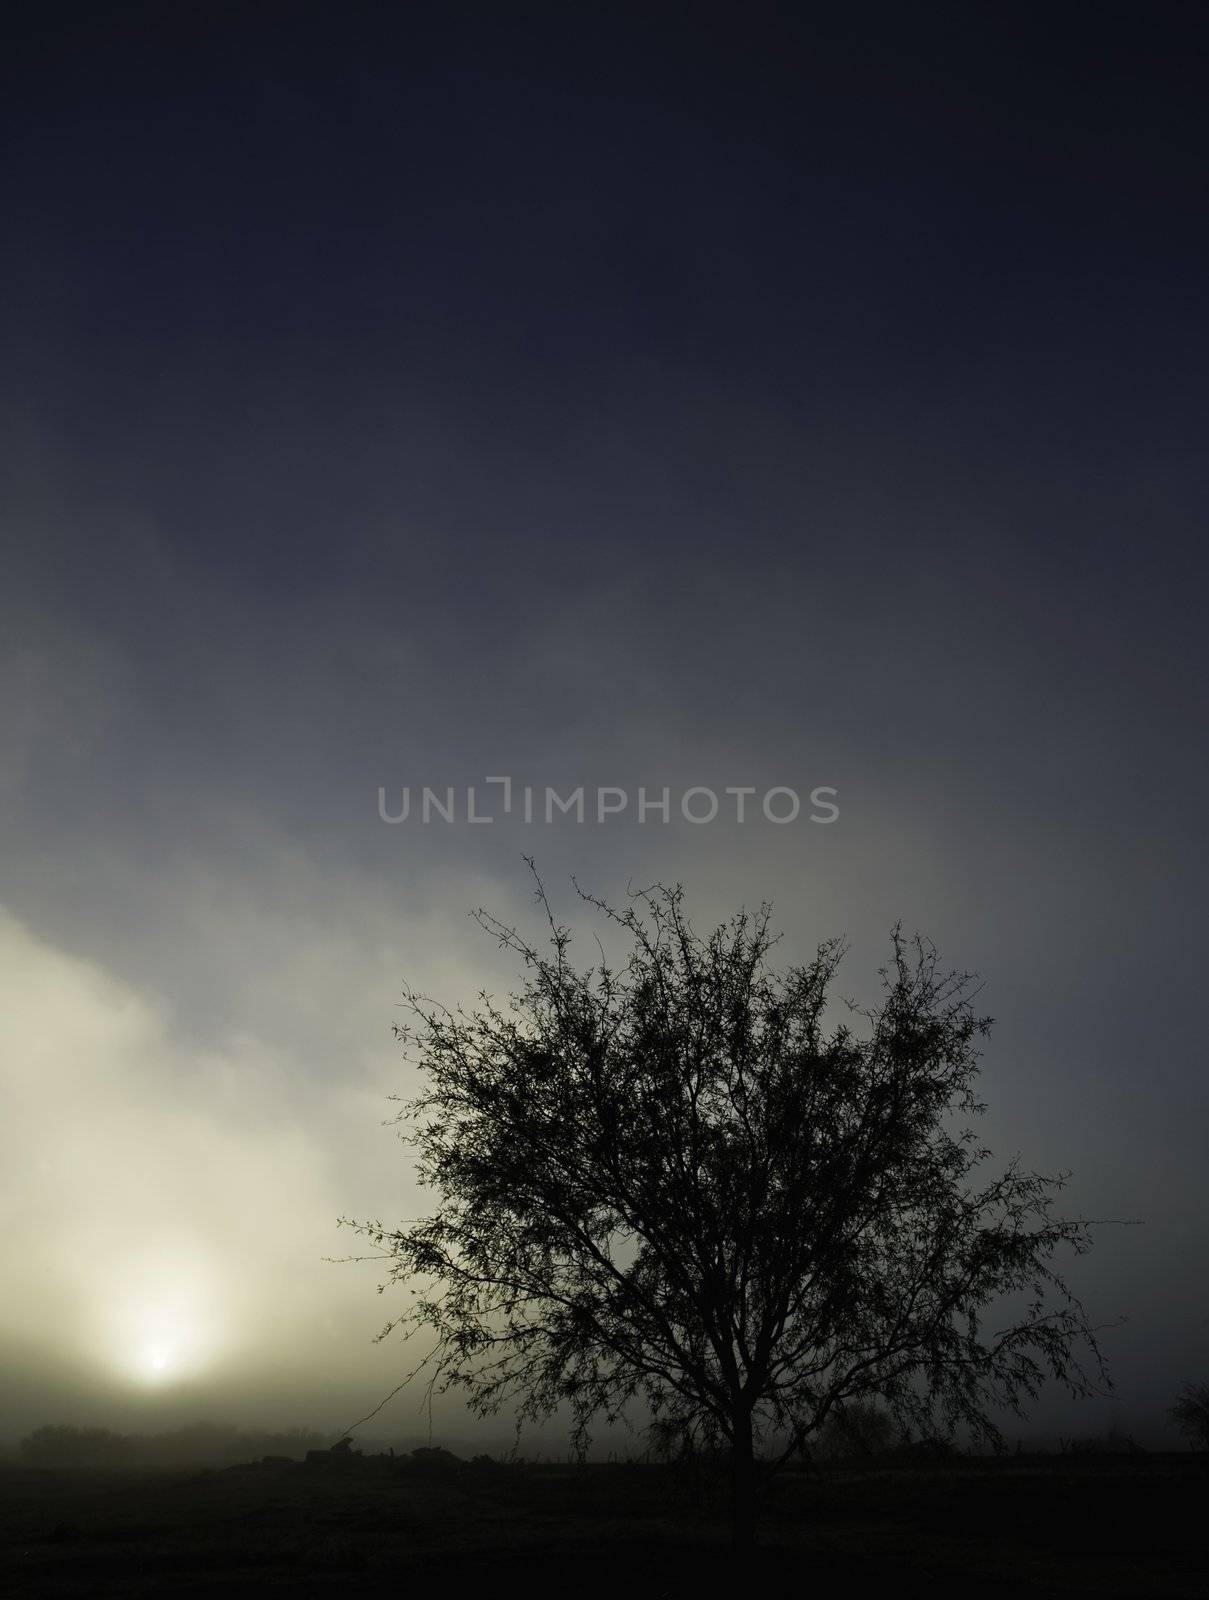 Tree silhouette against a foggy sky in a desolate landscape.